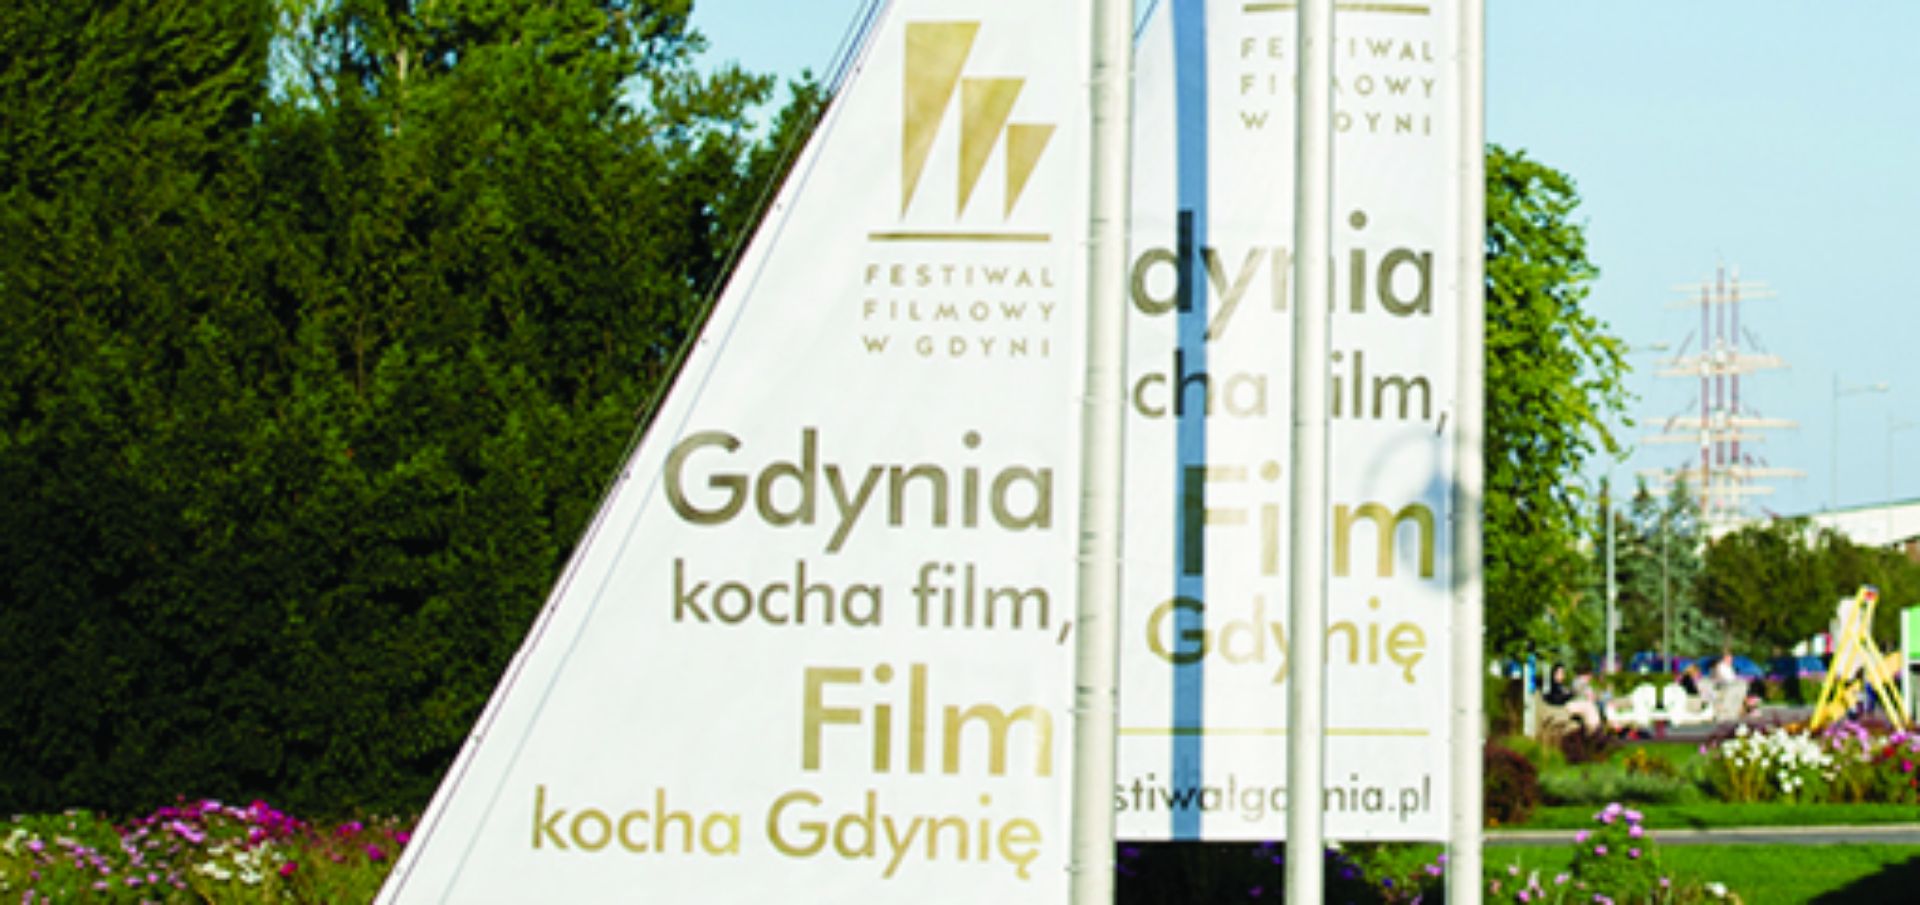 Become a volunteer of the 40th Gdynia Film Festival!